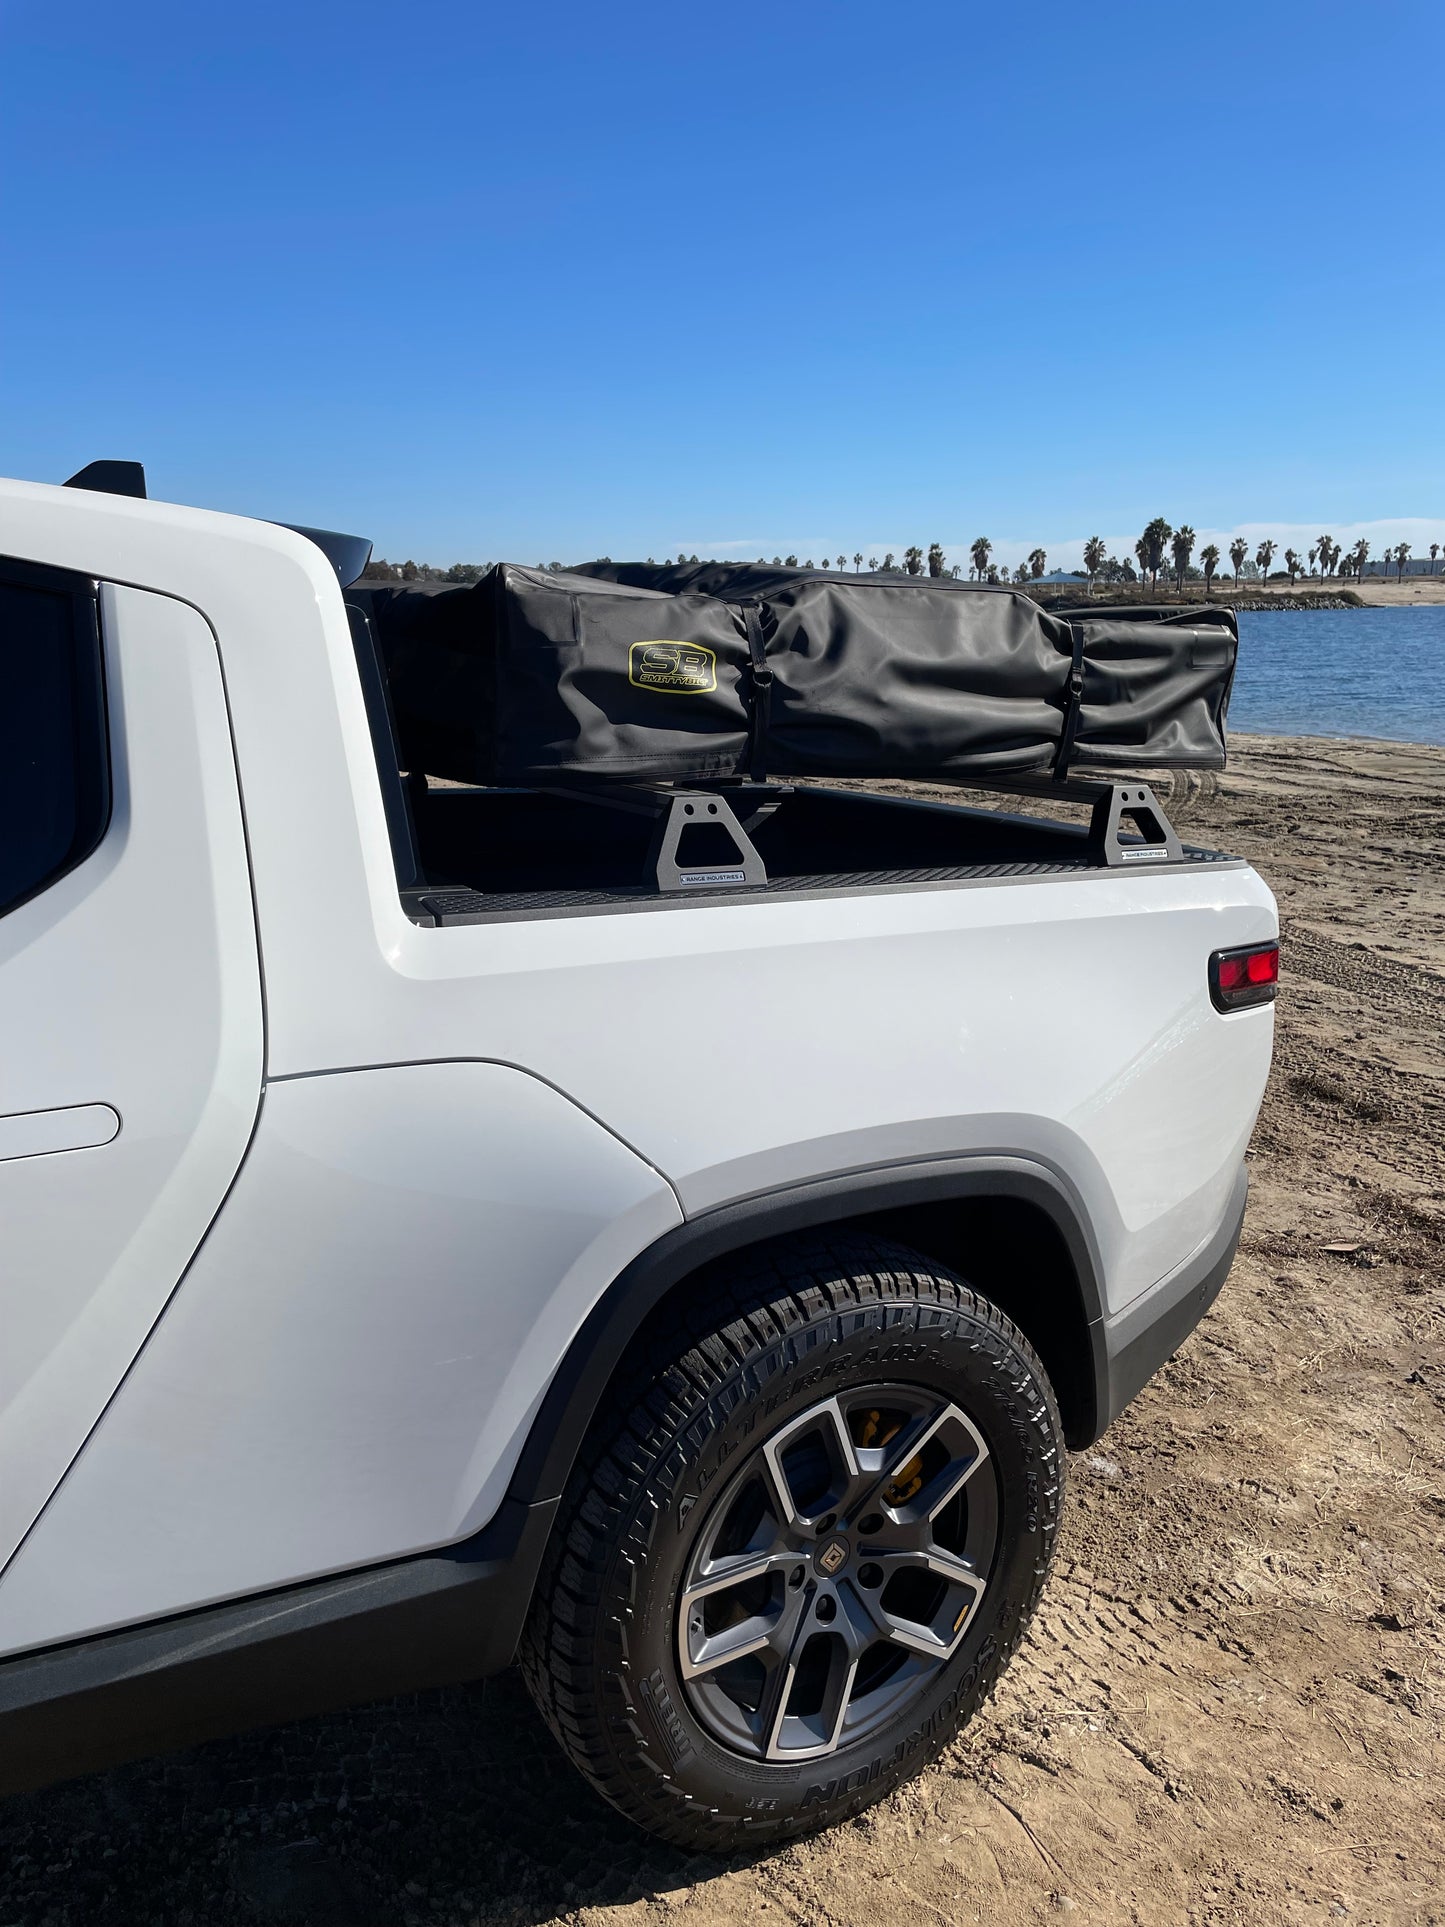 Badwater Rack System Compatible With Rivian R1T